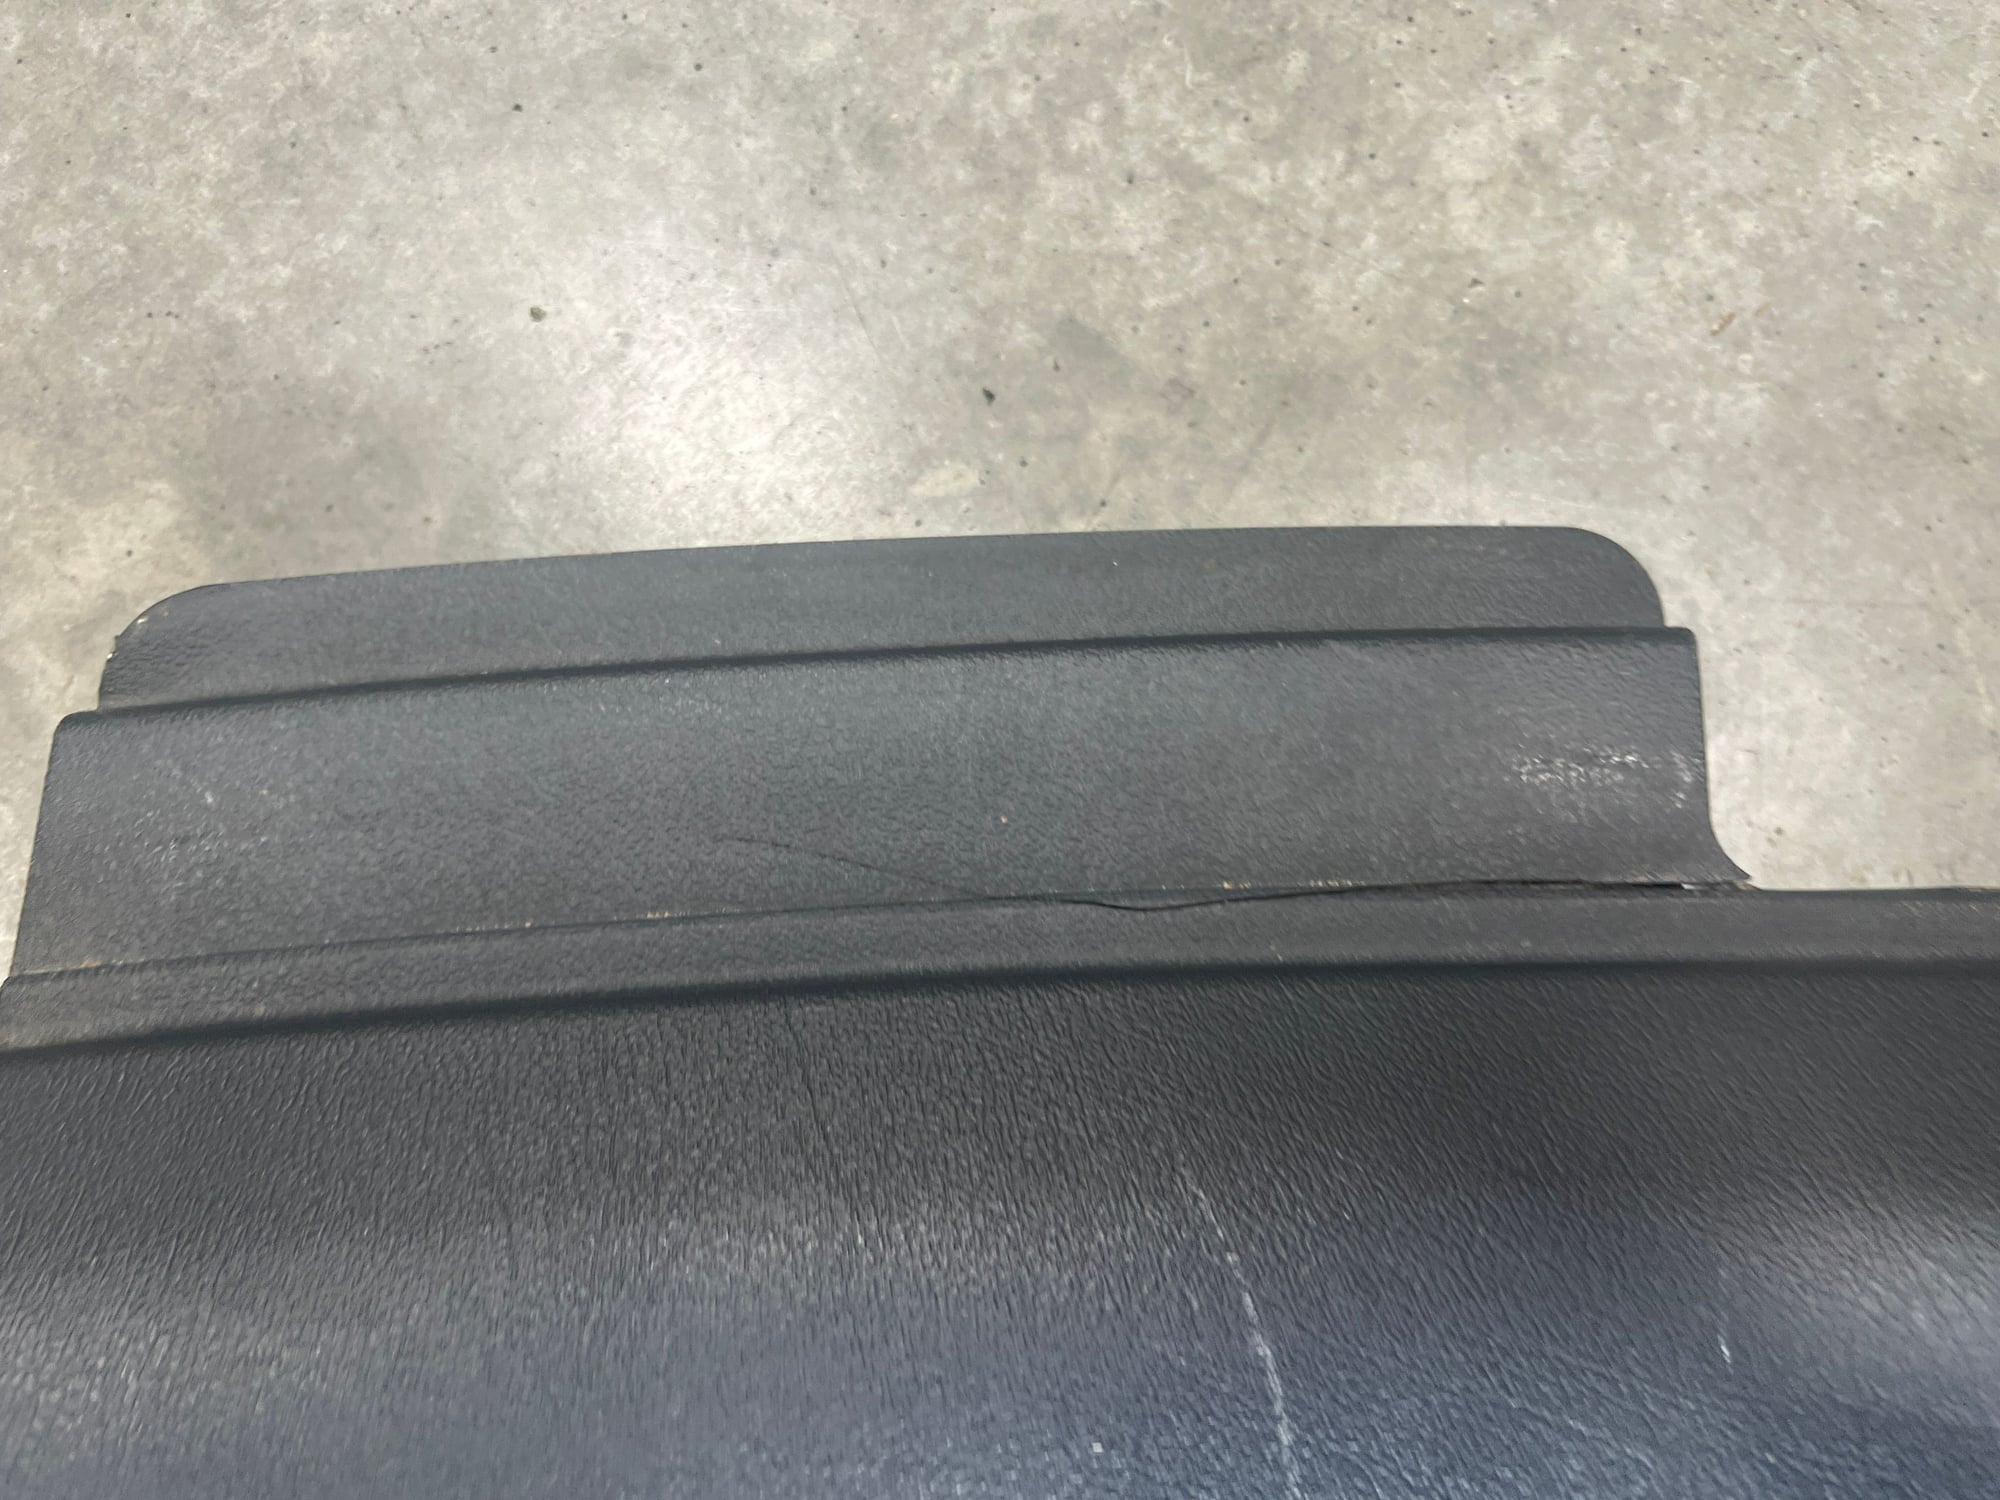 Interior/Upholstery - Parade boot covers and ebony dash pad - Used - Owensboro, KY 42301, United States